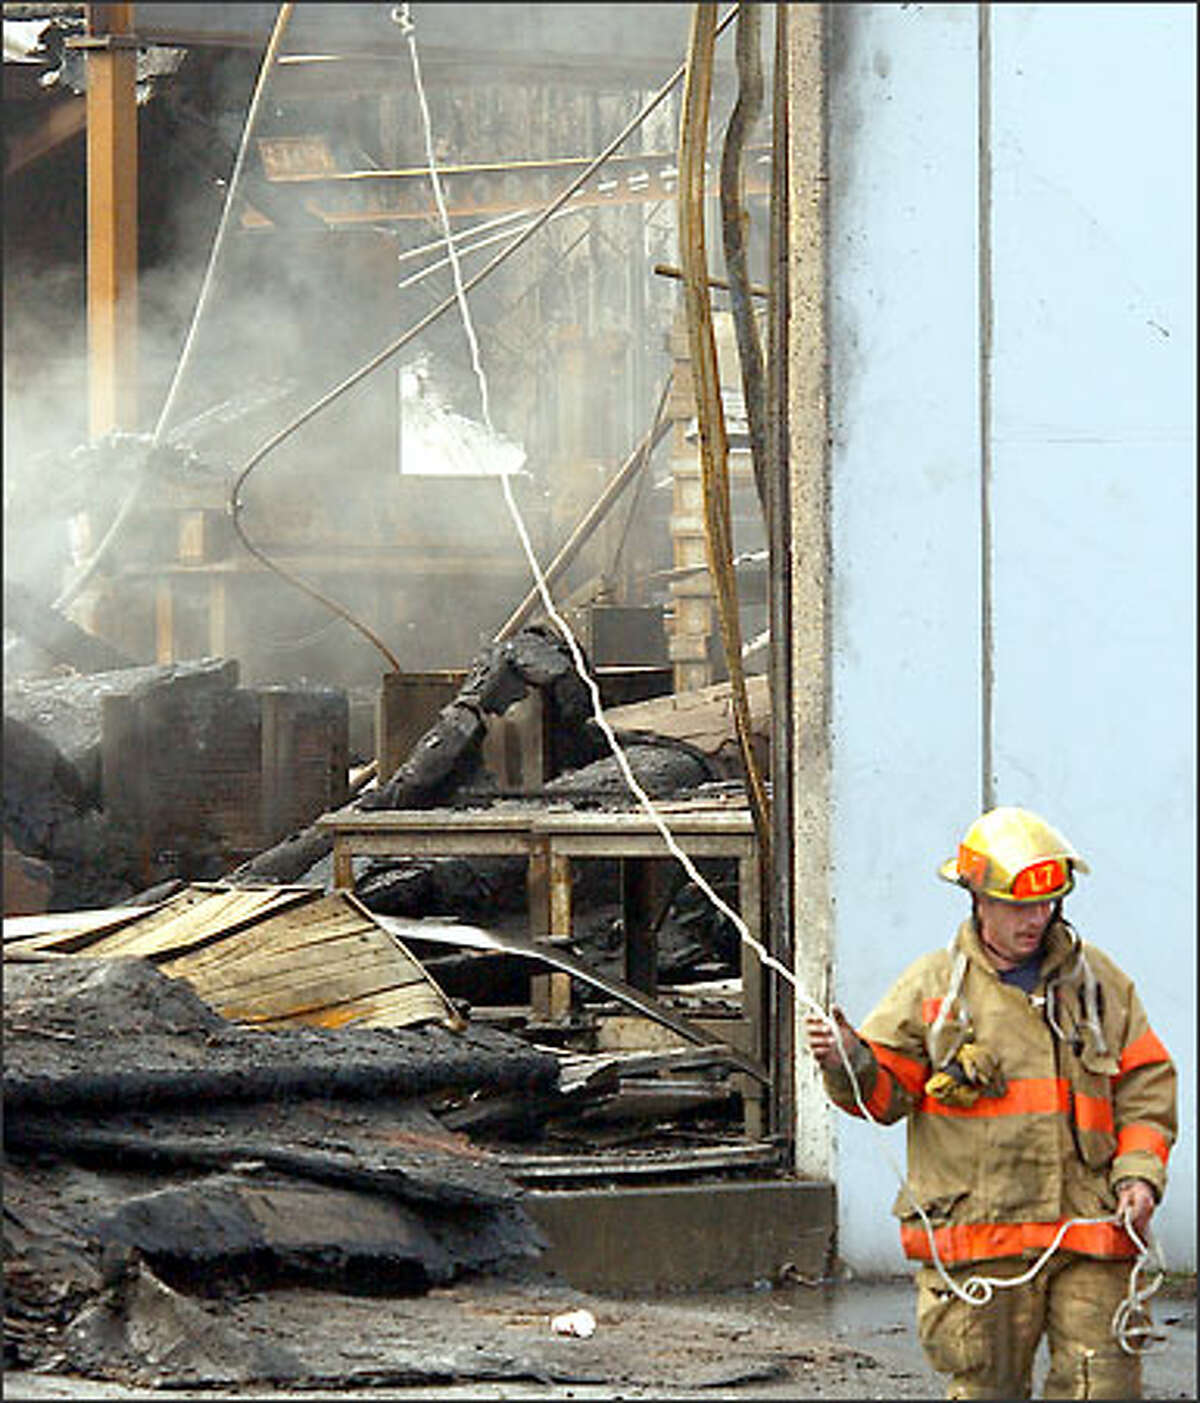 A Seattle firefighter drags a line that guides an overhead nozzle in an effort to put out a still-smoldering fire at Capital Industries, a Georgetown metal-fabricating company. The main building of the third-generation family business was destroyed by the blaze Sunday.